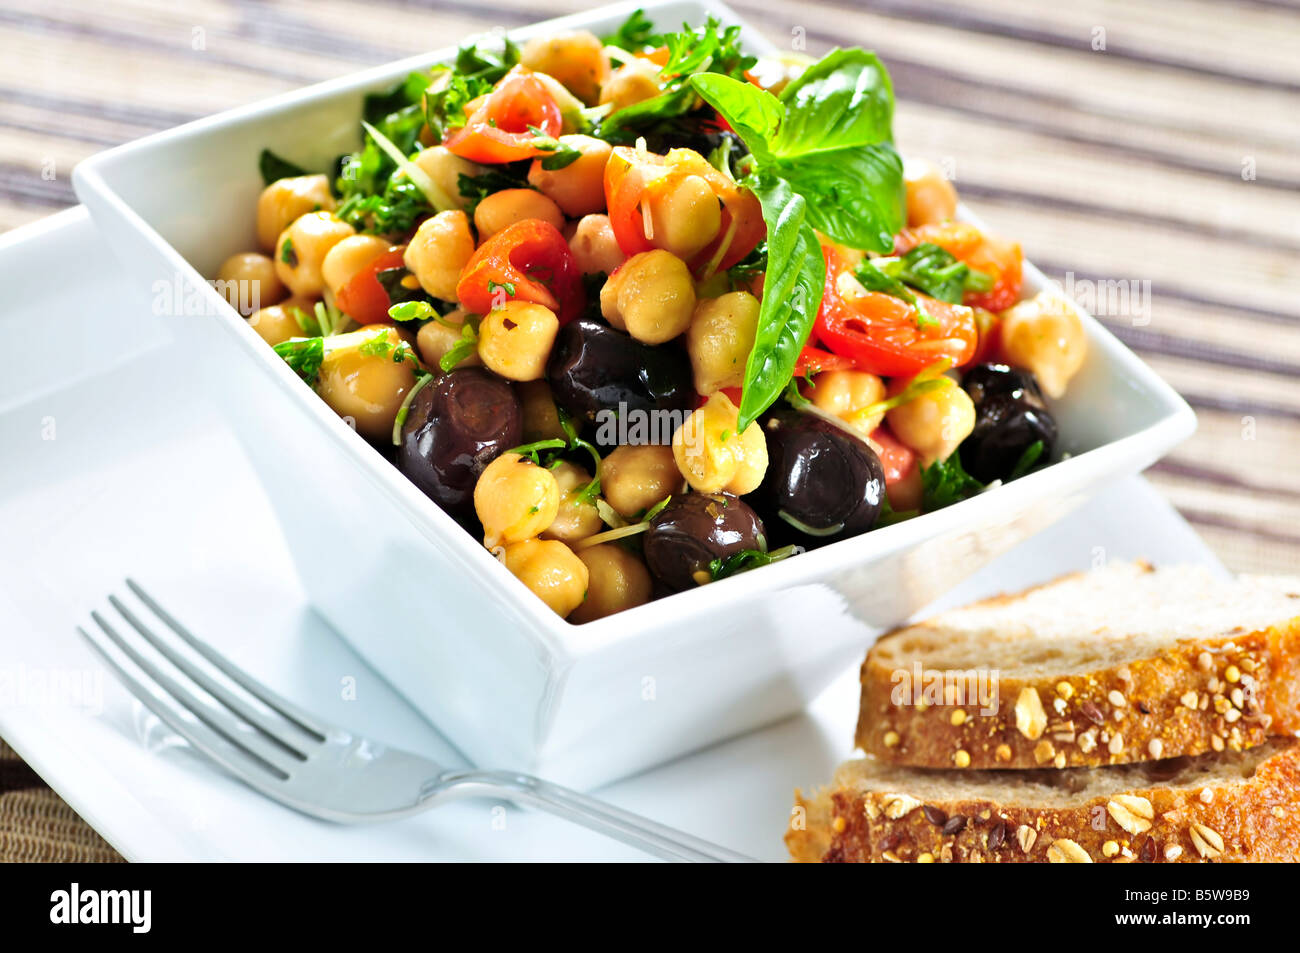 Vegetarian meal of chickpea or garbanzo beans salad Stock Photo